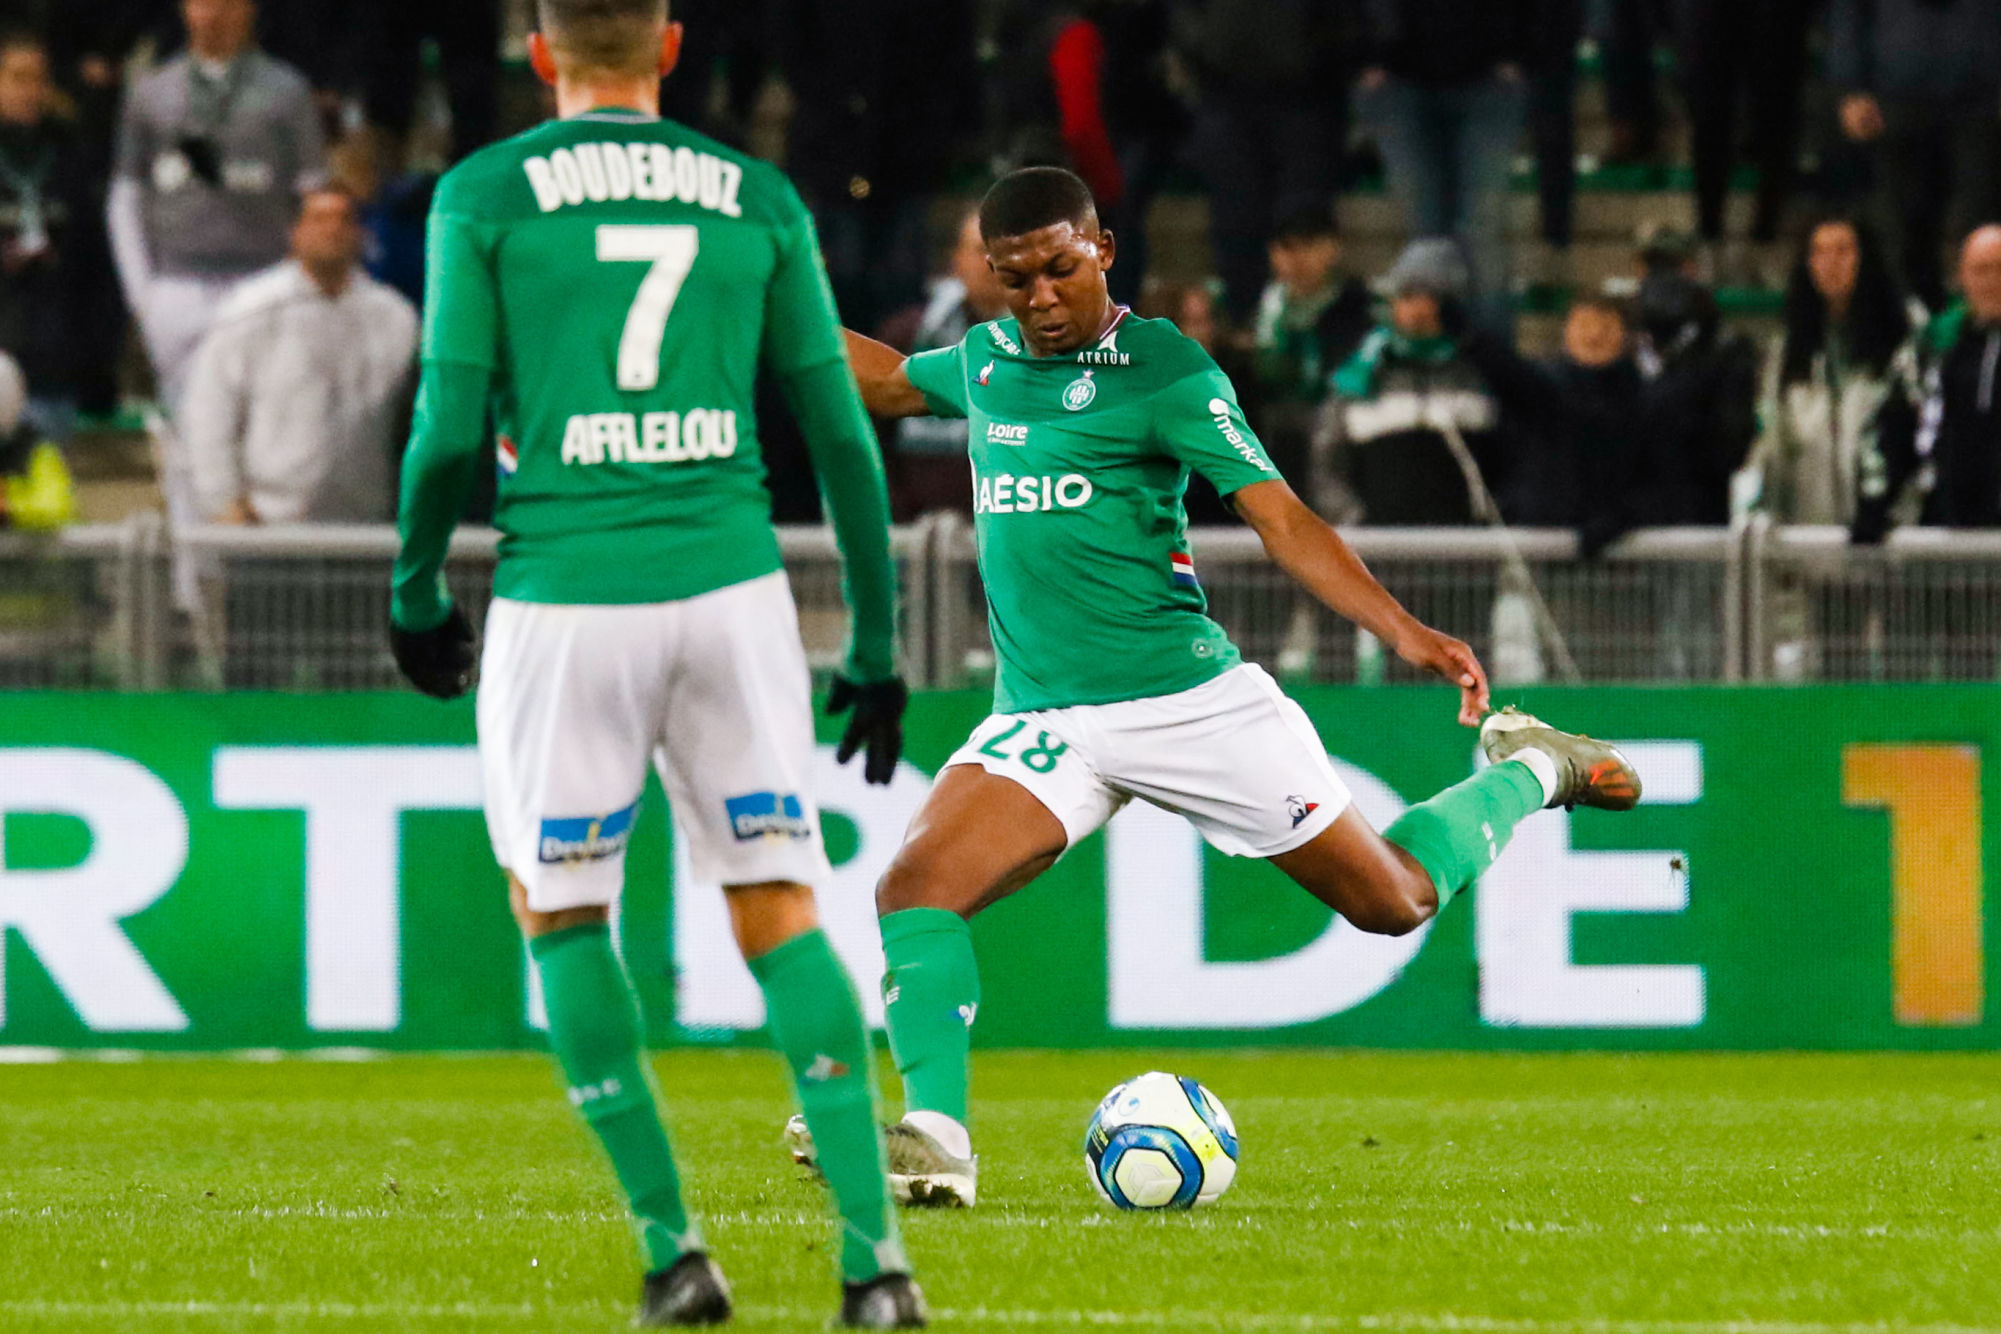 Zaydou YOUSSOUF of Saint Etienne during the Ligue 1 match between Saint Etienne and Montpellier at Stade Geoffroy-Guichard on November 24, 2019 in Saint-Etienne, France. (Photo by Romain Biard/Icon Sport) - Zaydou YOUSSOUF - Stade Geoffroy-Guichard - Saint Etienne (France)